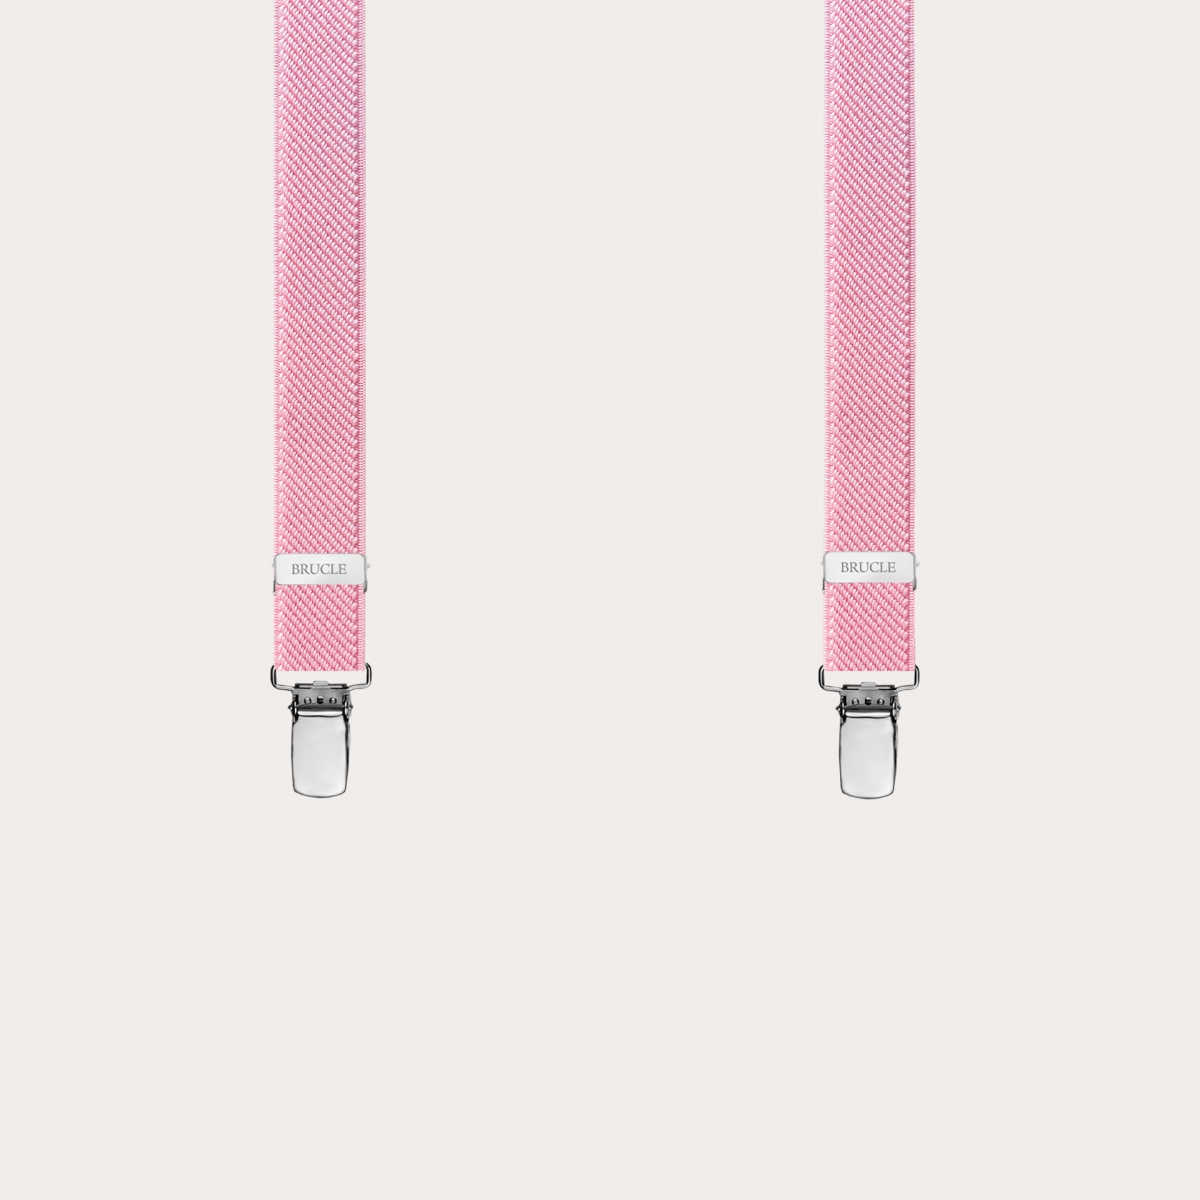 BRUCLE X-shaped suspenders for boys and girls, pastel pink